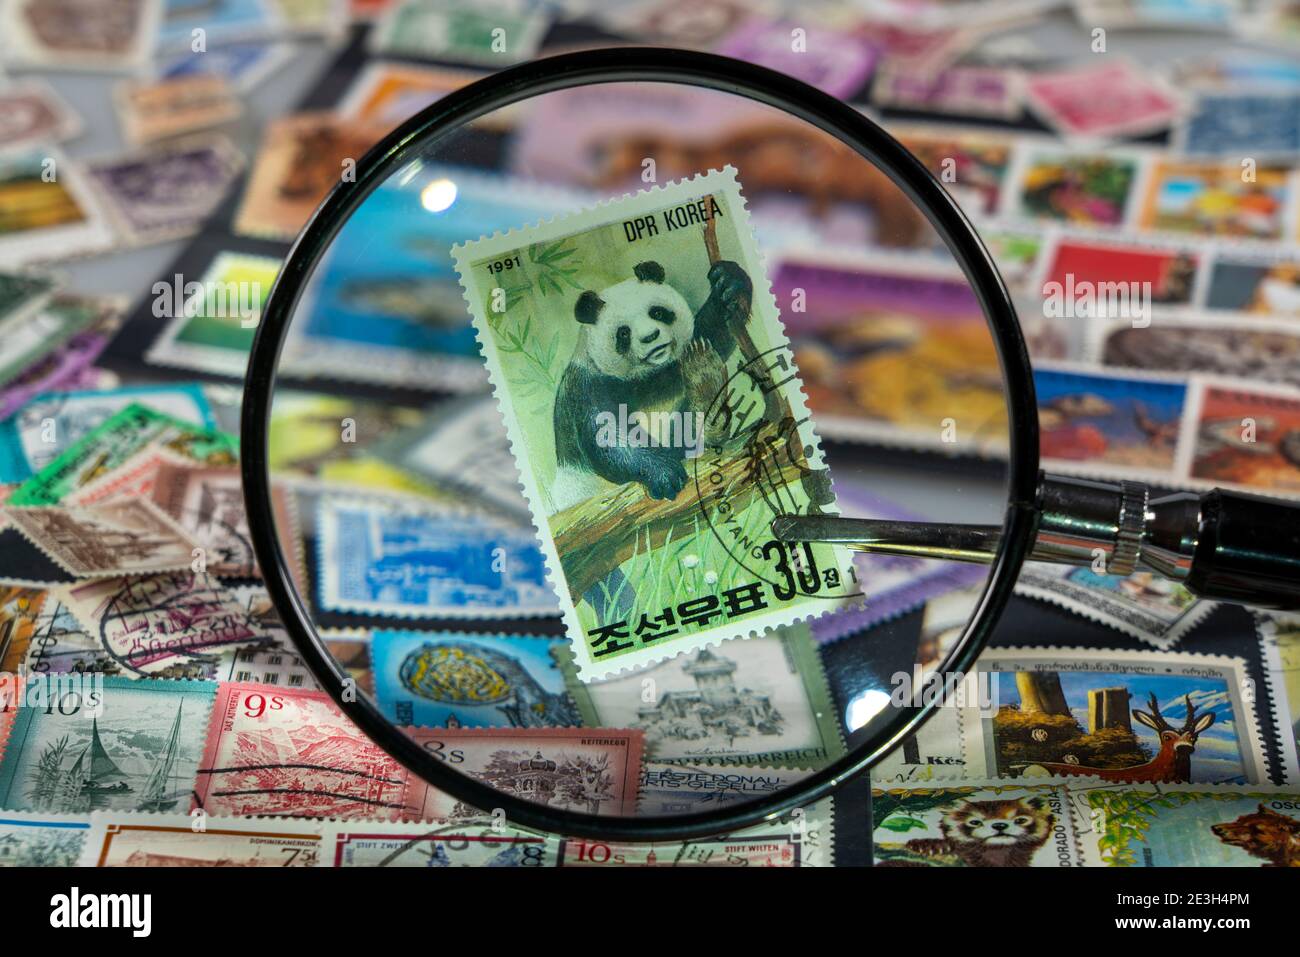 Stamp collection, collect, postage stamps, postage stamps from different countries, magnifying glass, stamp with panda bear from North Korea, Stock Photo